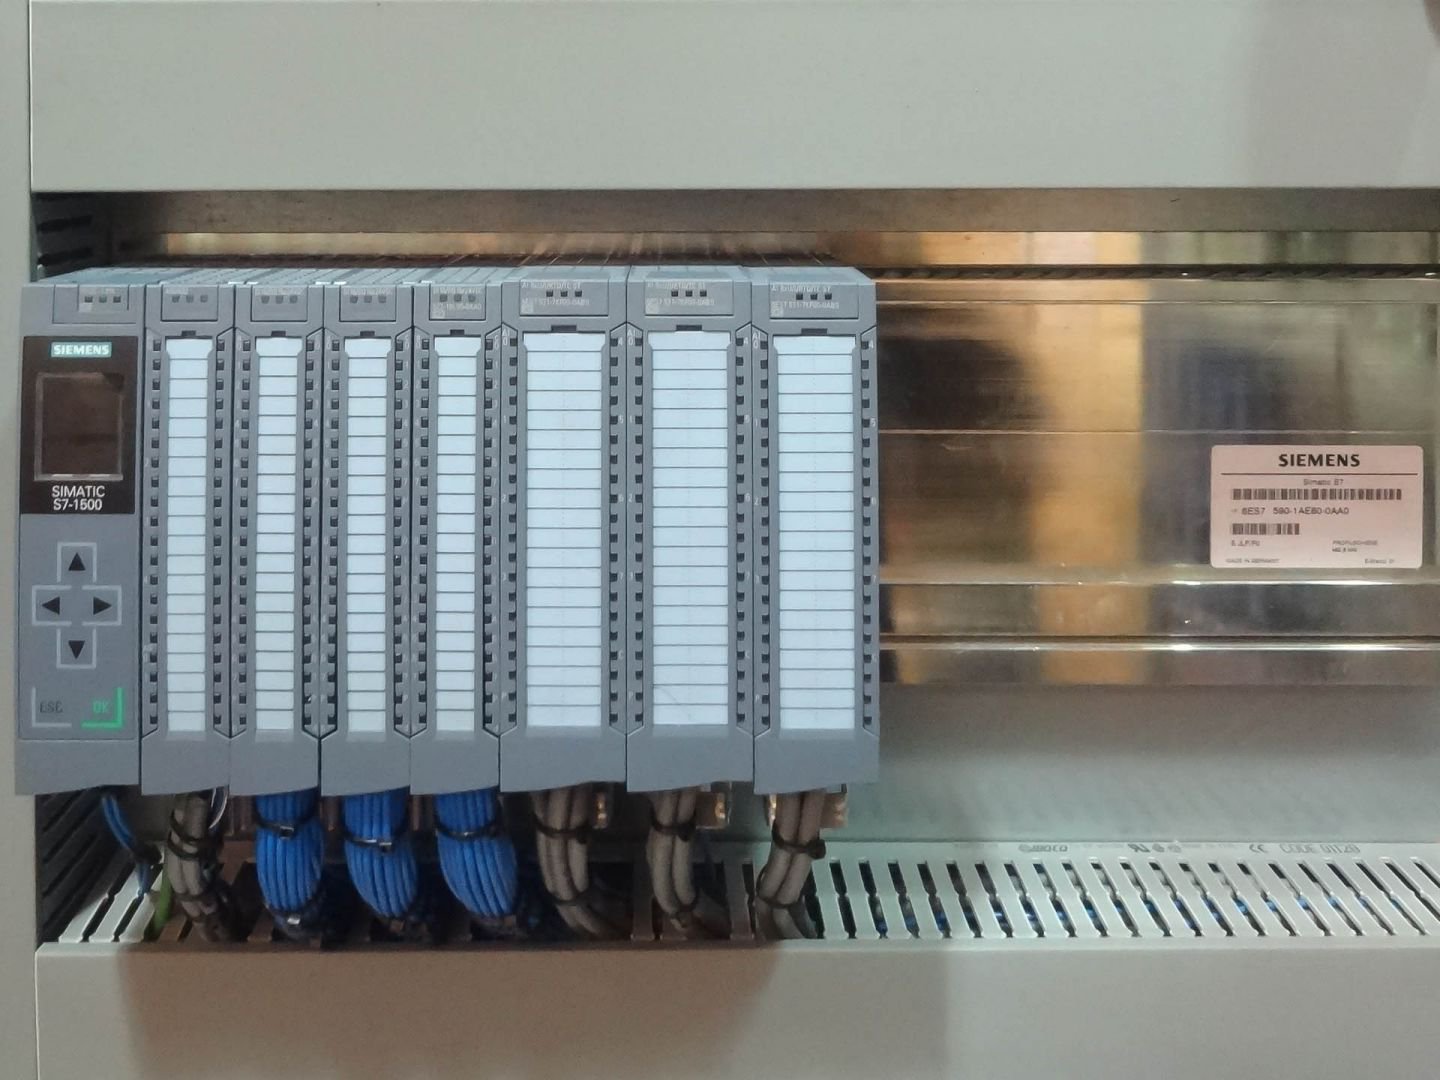 Find out more about how Axis Controls can integrate a Siemens PLC system